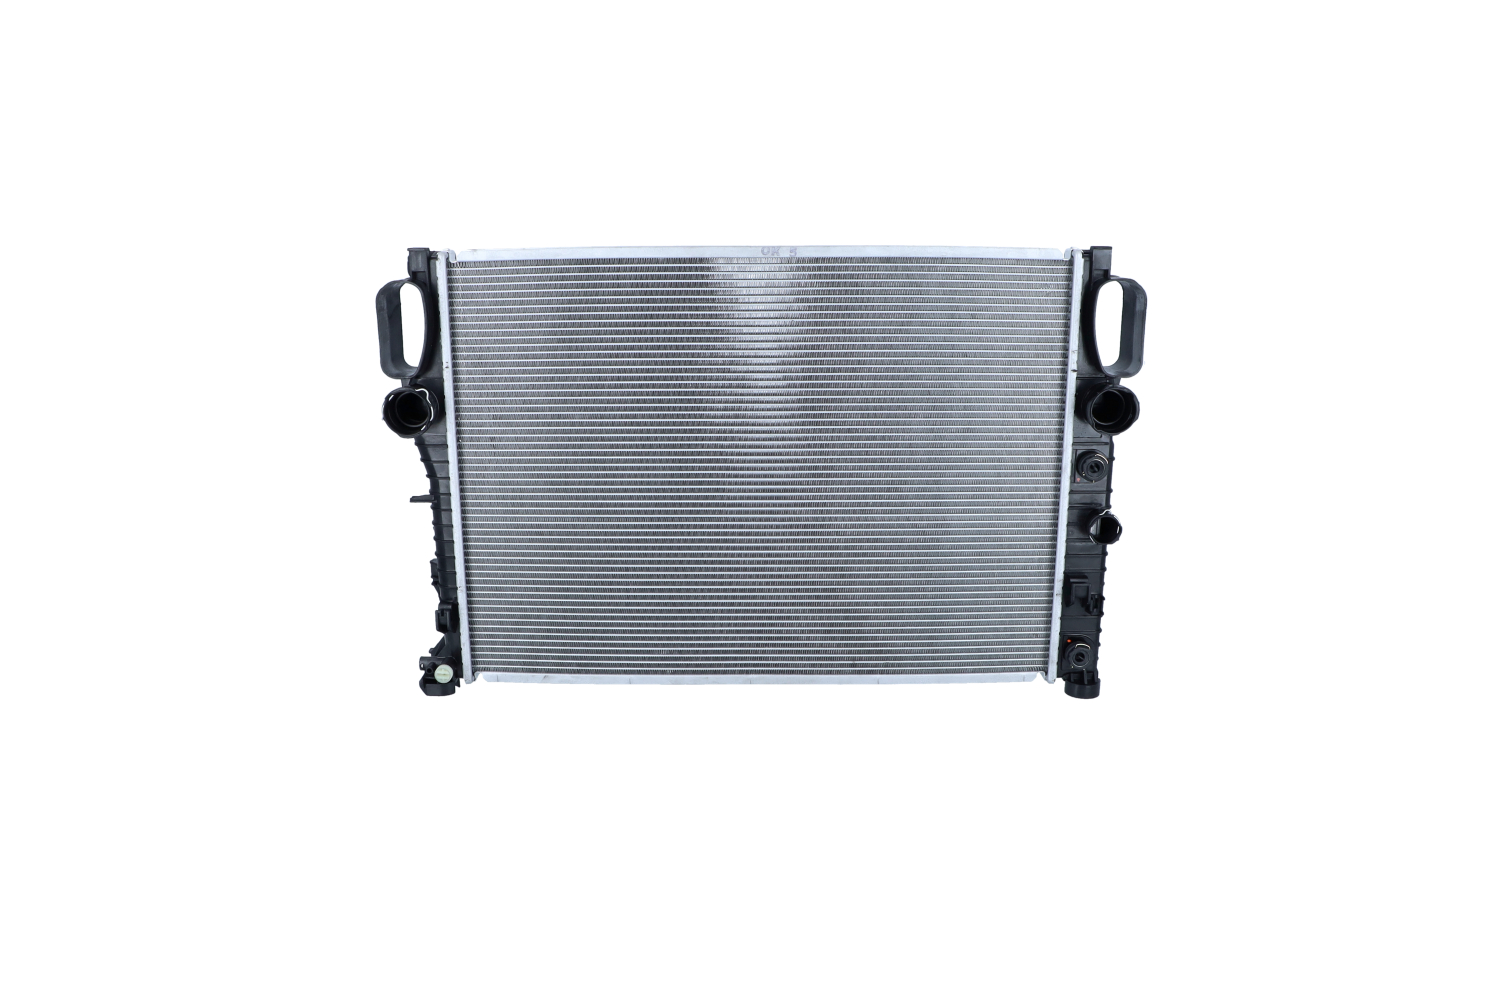 NRF EASY FIT 53423 Engine radiator Aluminium, 640 x 451 x 24 mm, with seal ring, Brazed cooling fins